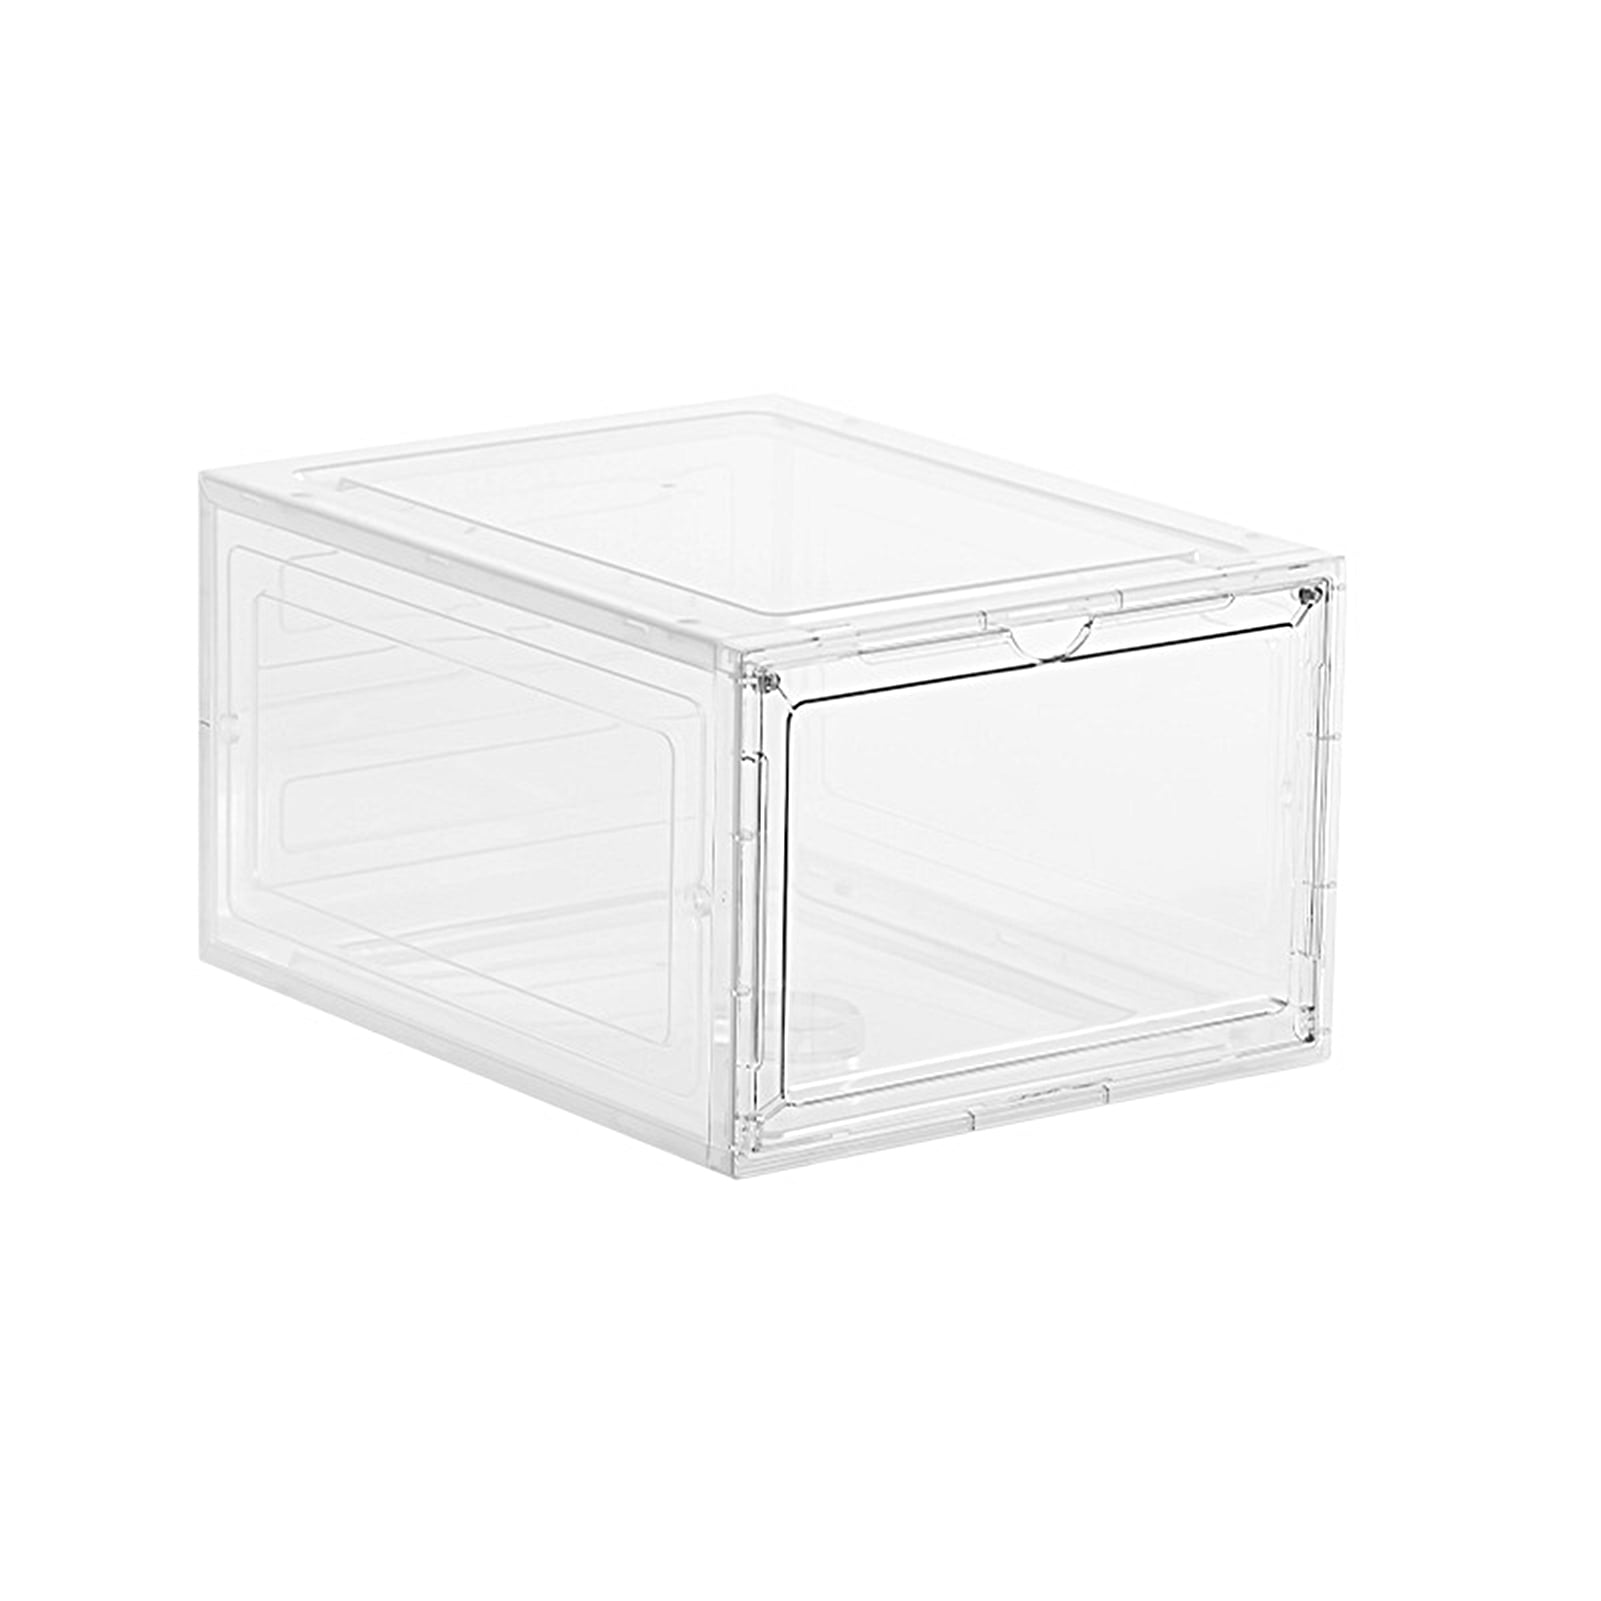 DEZENE Clear Shoe Storage Boxes: Pack of 6 Stackable Plastic Shoe Organizer  Containers for Closet, D…See more DEZENE Clear Shoe Storage Boxes: Pack of